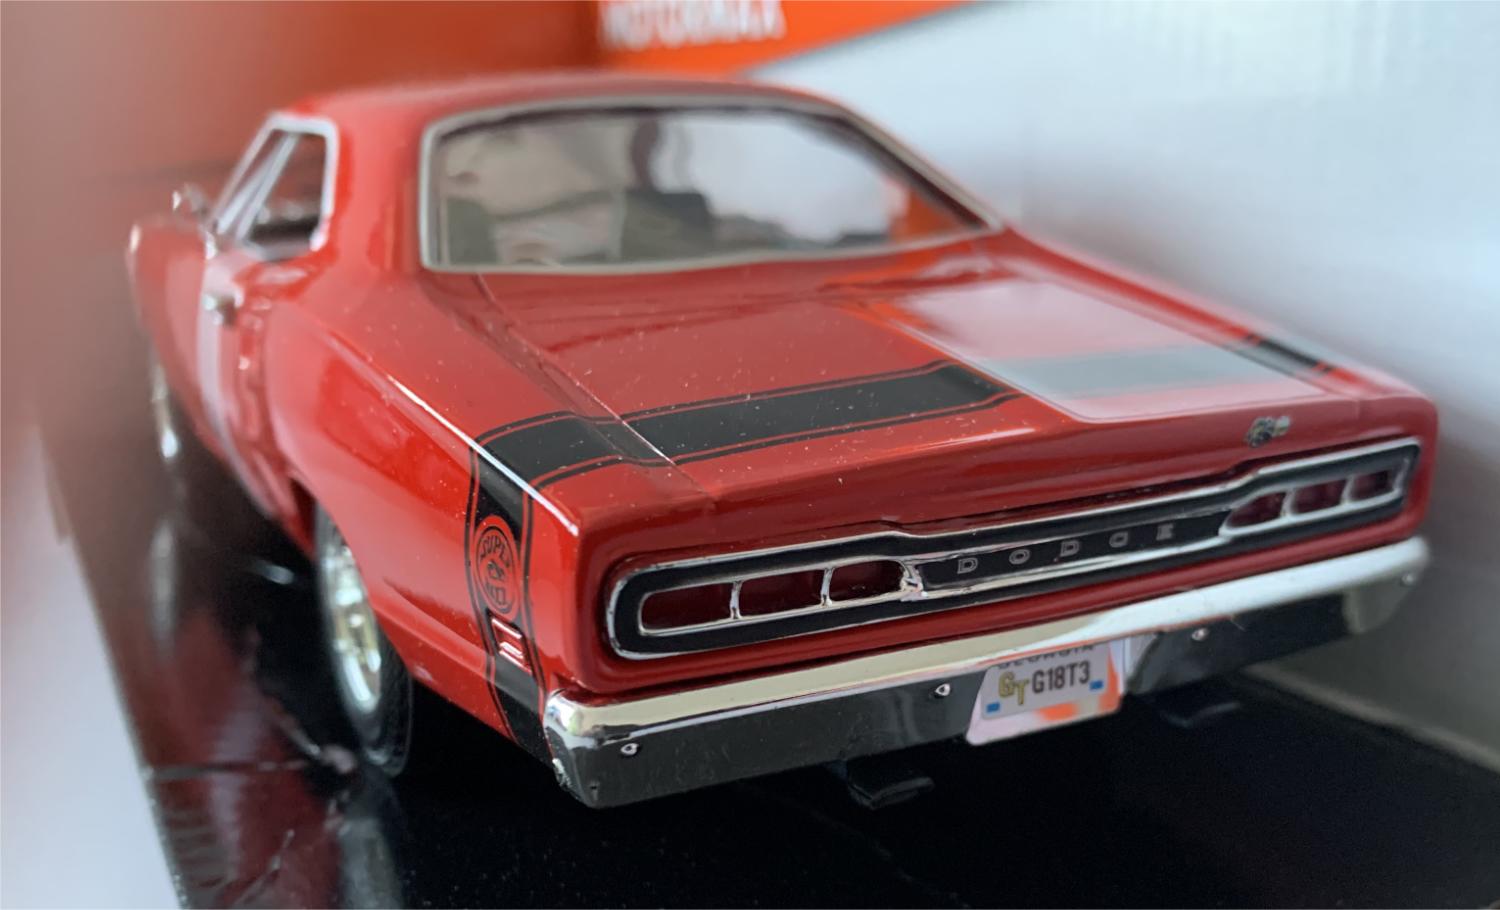 Dodge Coronet Super Bee 1969, red with black bonnet, 1:24 scale model from Motormax